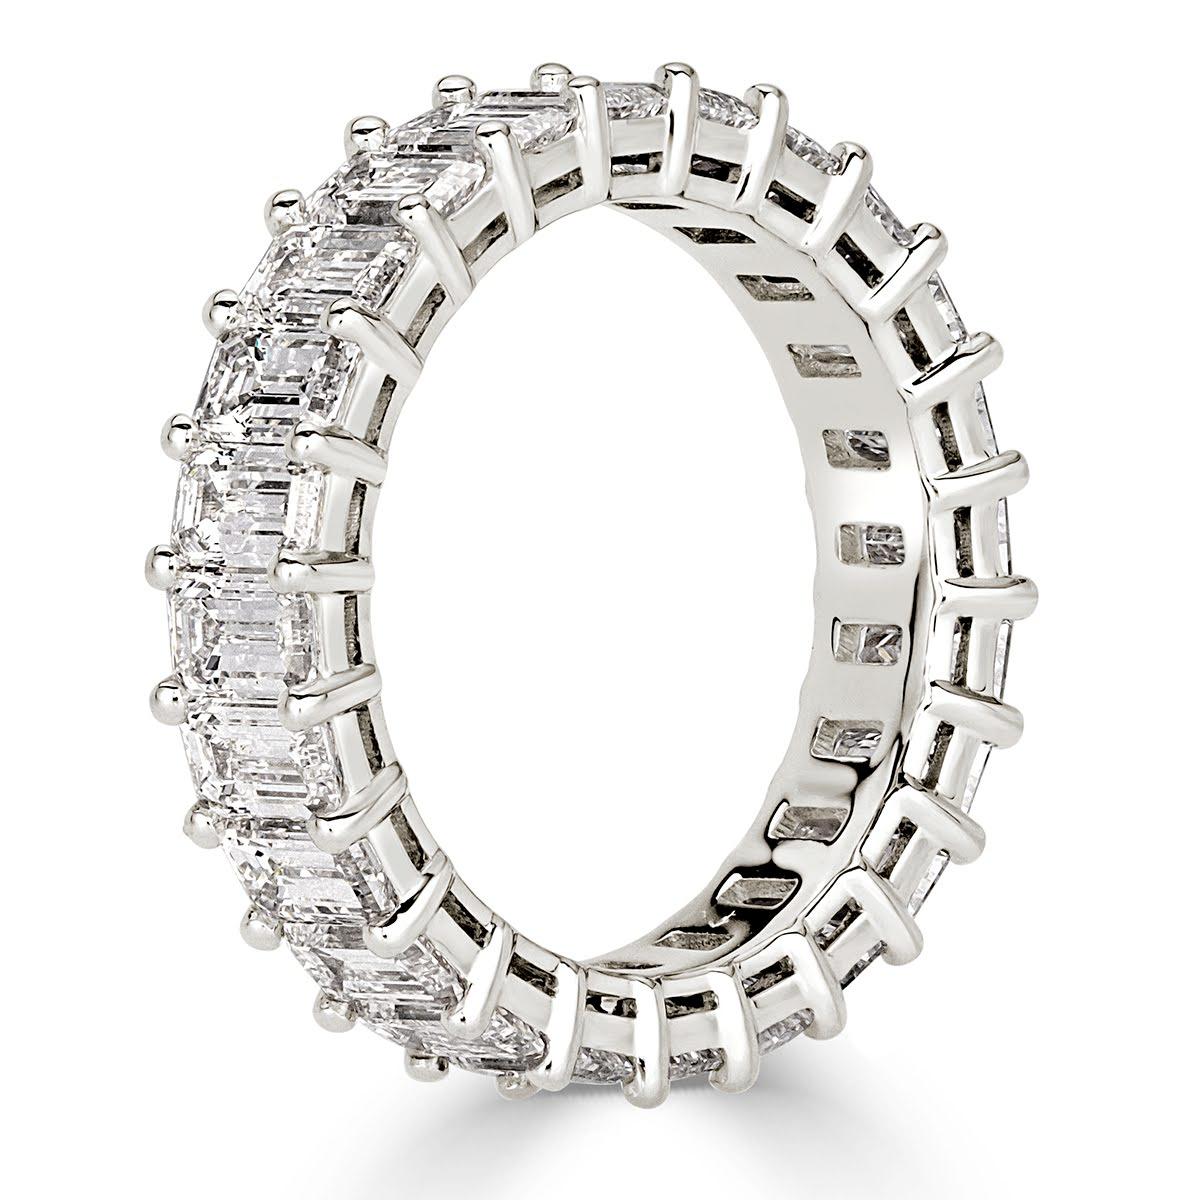 Custom created in 18k white gold, this captivating emerald cut diamond eternity band features 4.87ct of perfectly matched emerald cut diamonds graded at E-F in color, VVS2-VS1 in clarity. All eternity bands are shown in a size 6.5. We custom craft